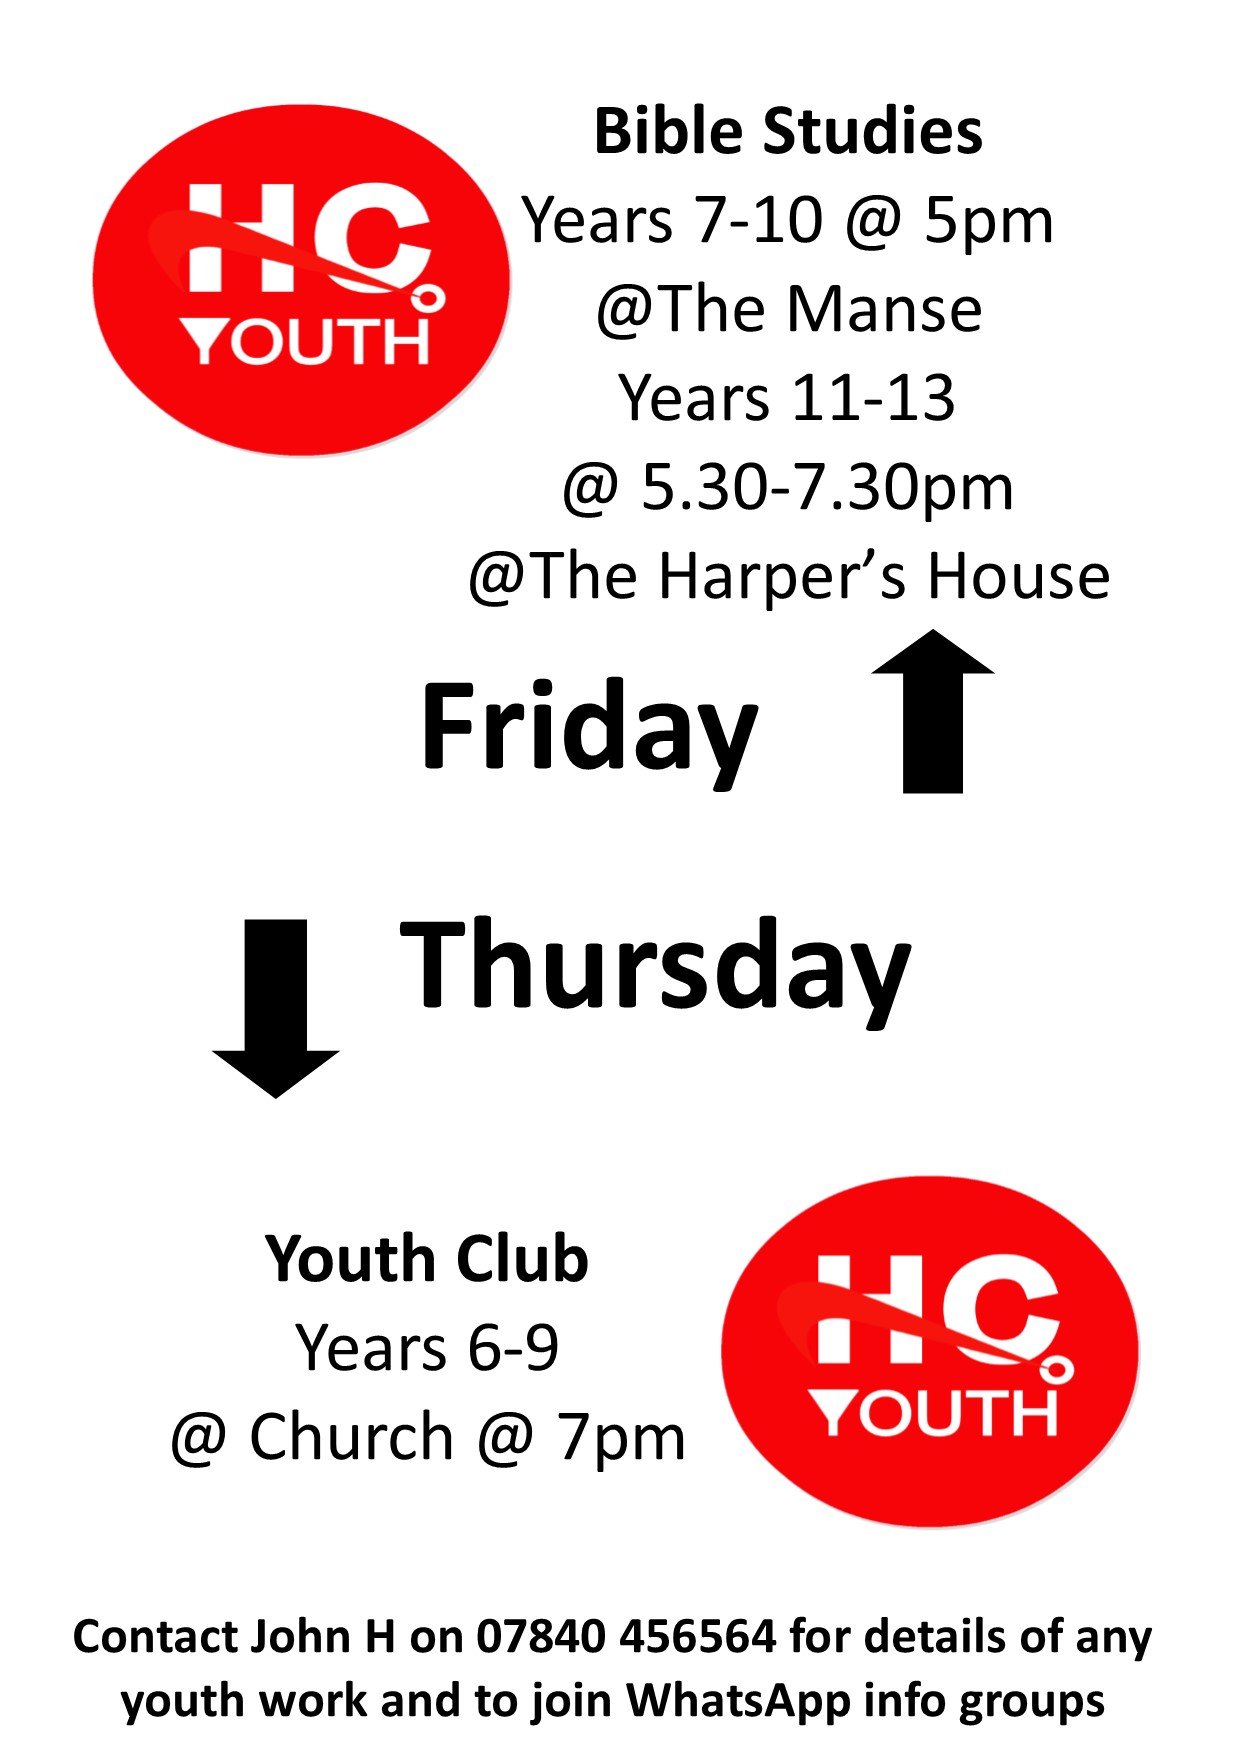 HCBC Youth Website Page Apr 22